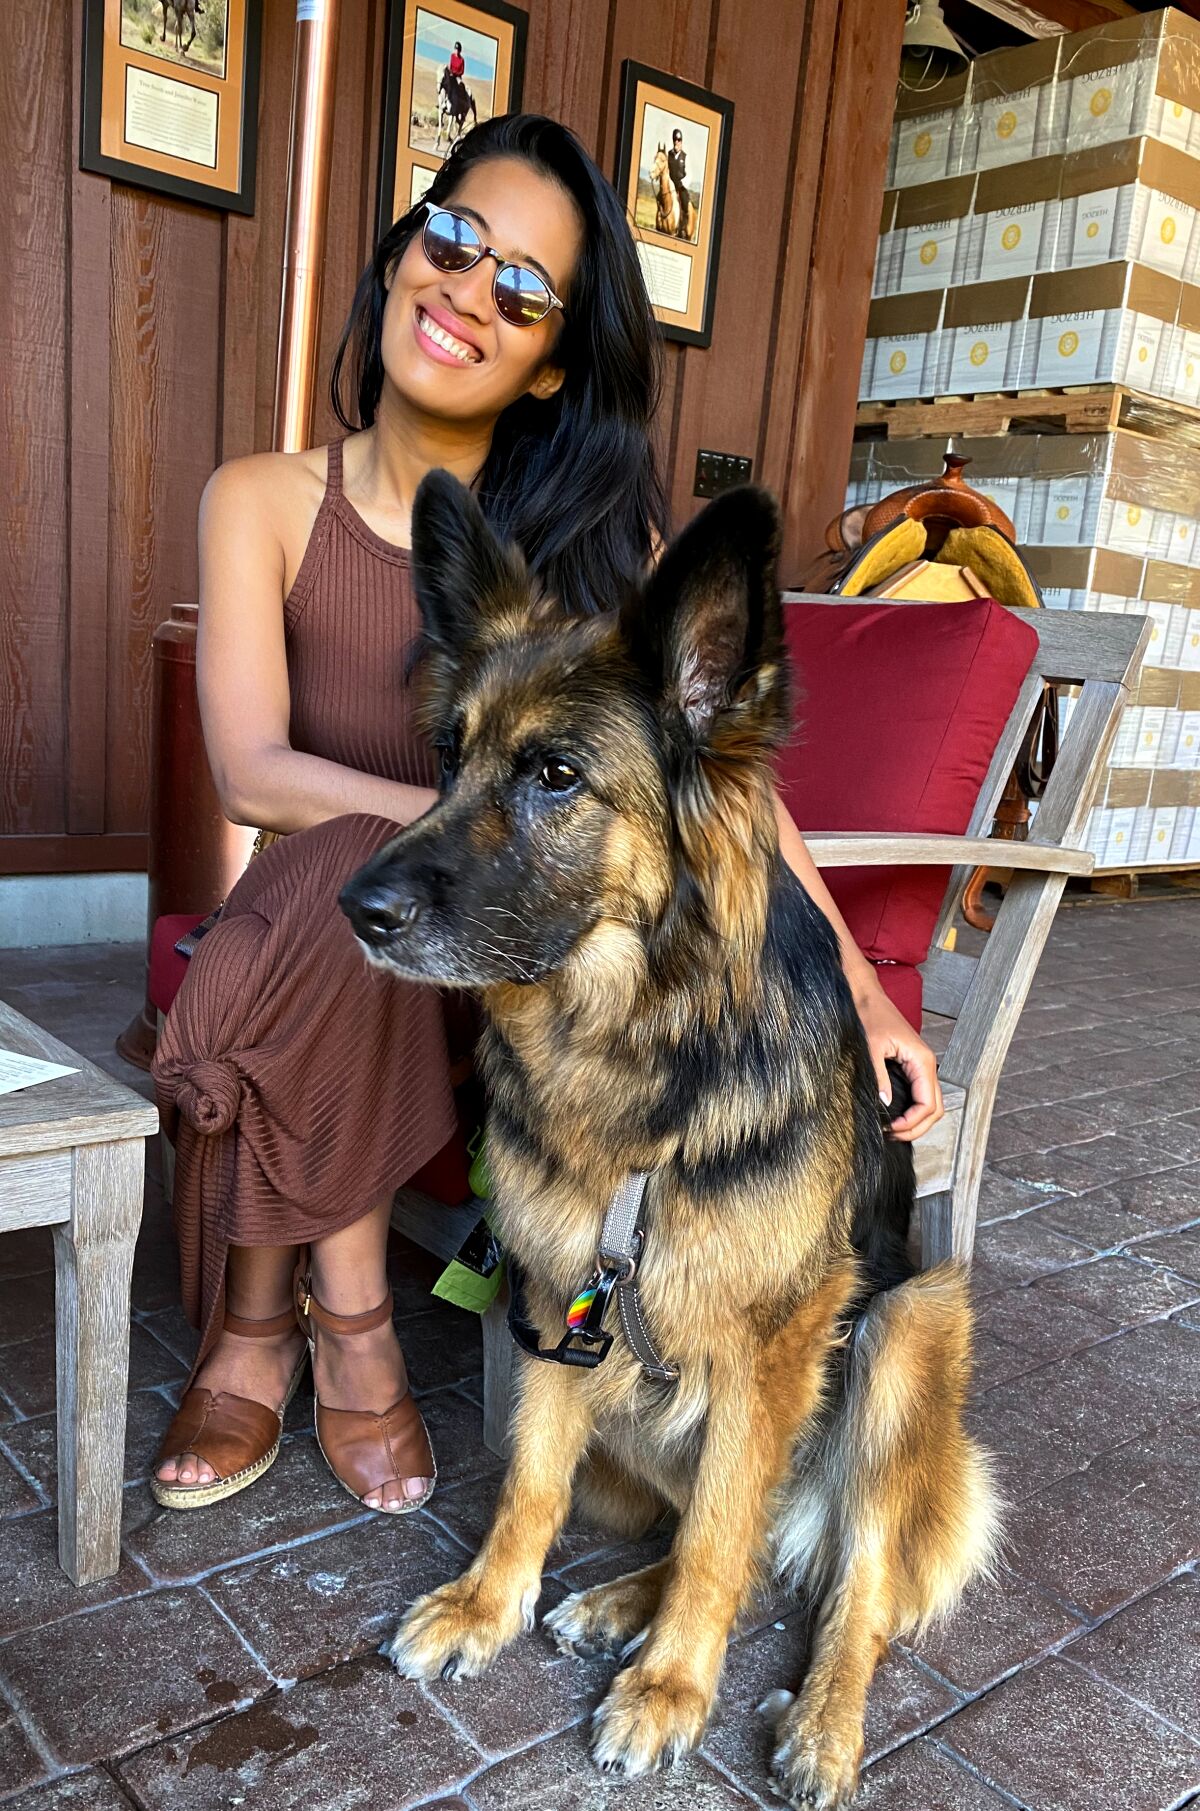 A woman smiles as she puts her arm around a large dog 